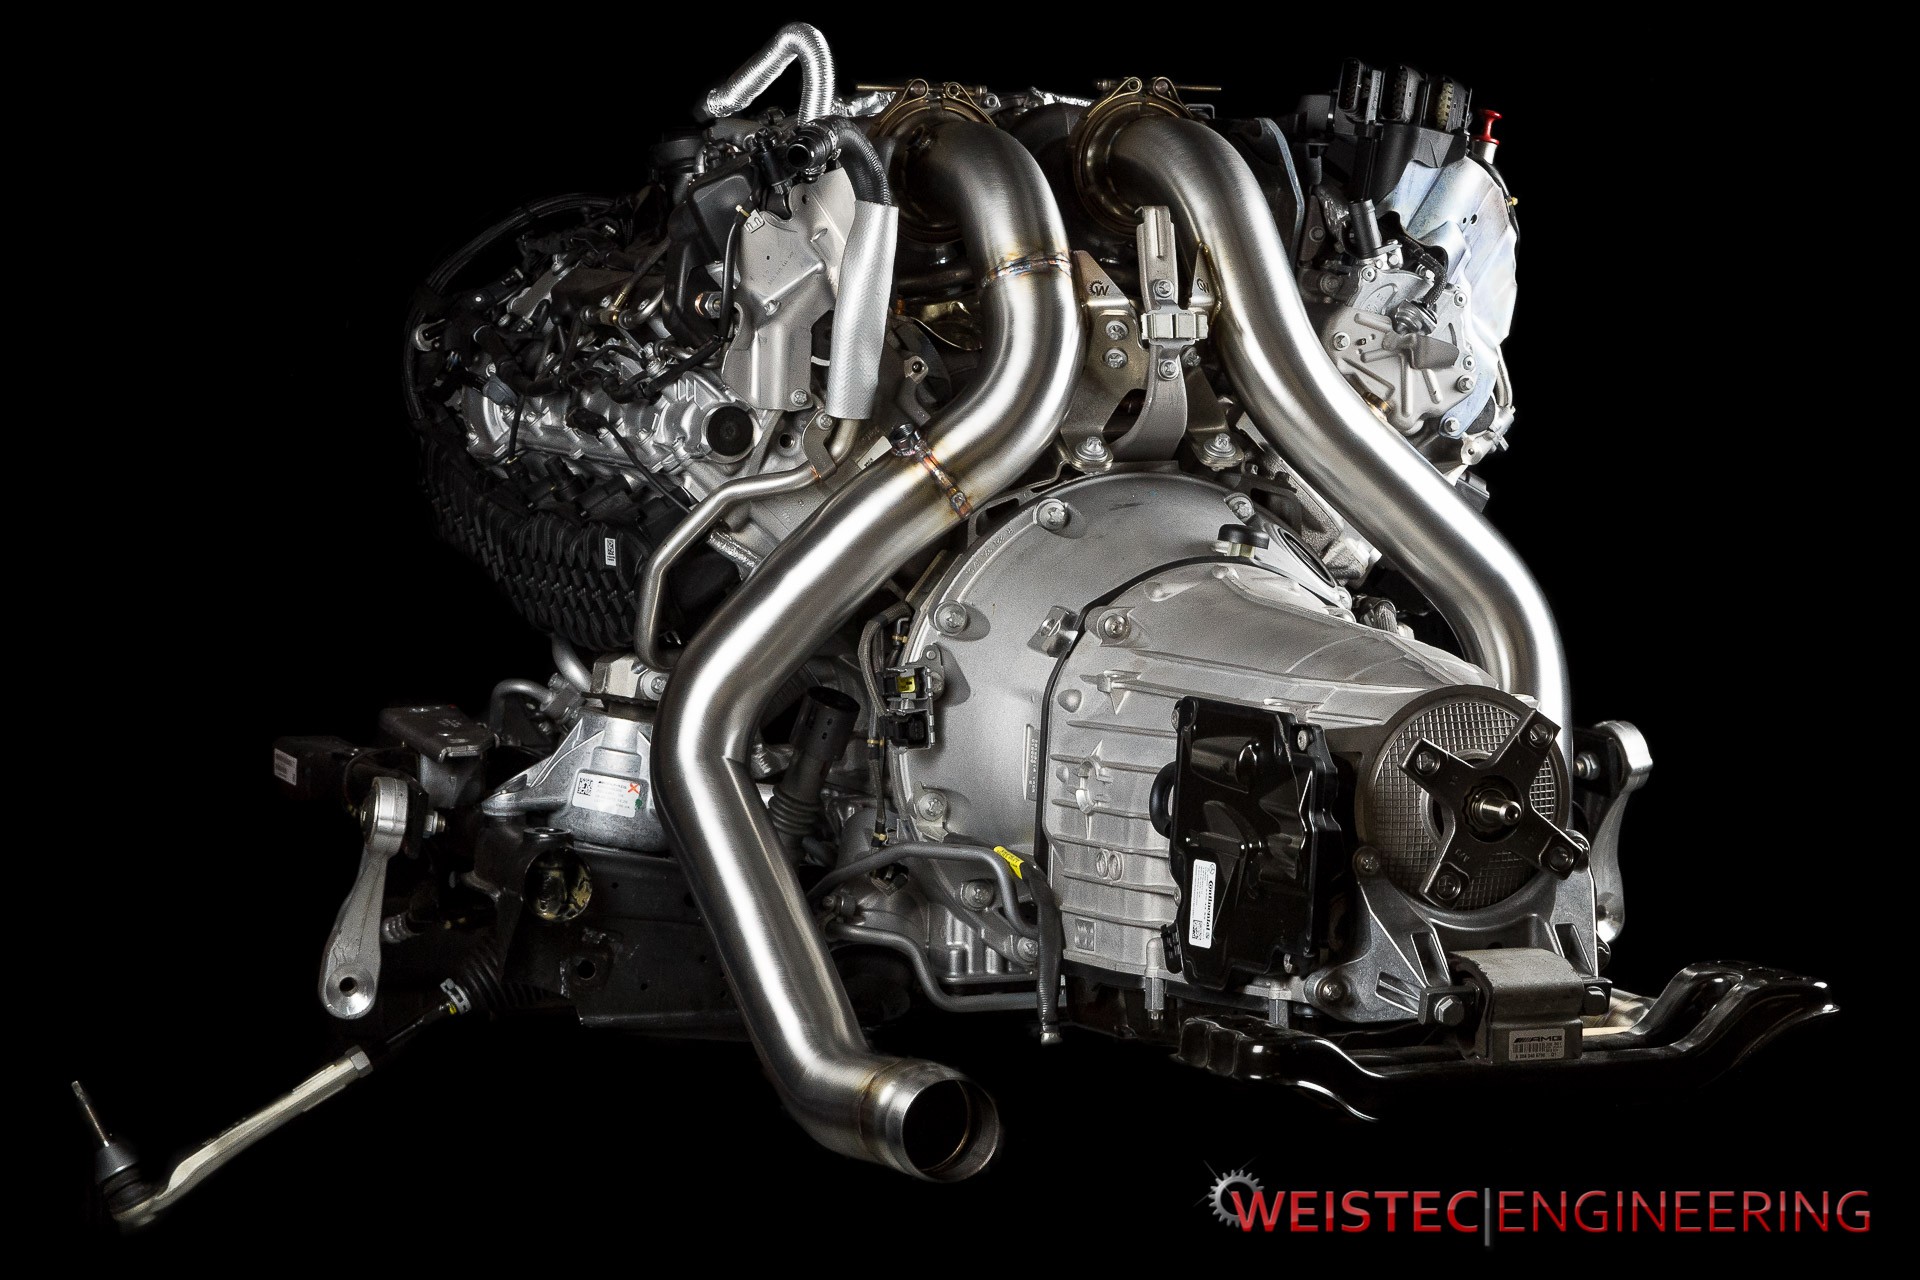 Mercedes Benz C63 AMG weistec downpipe installed on Engine 